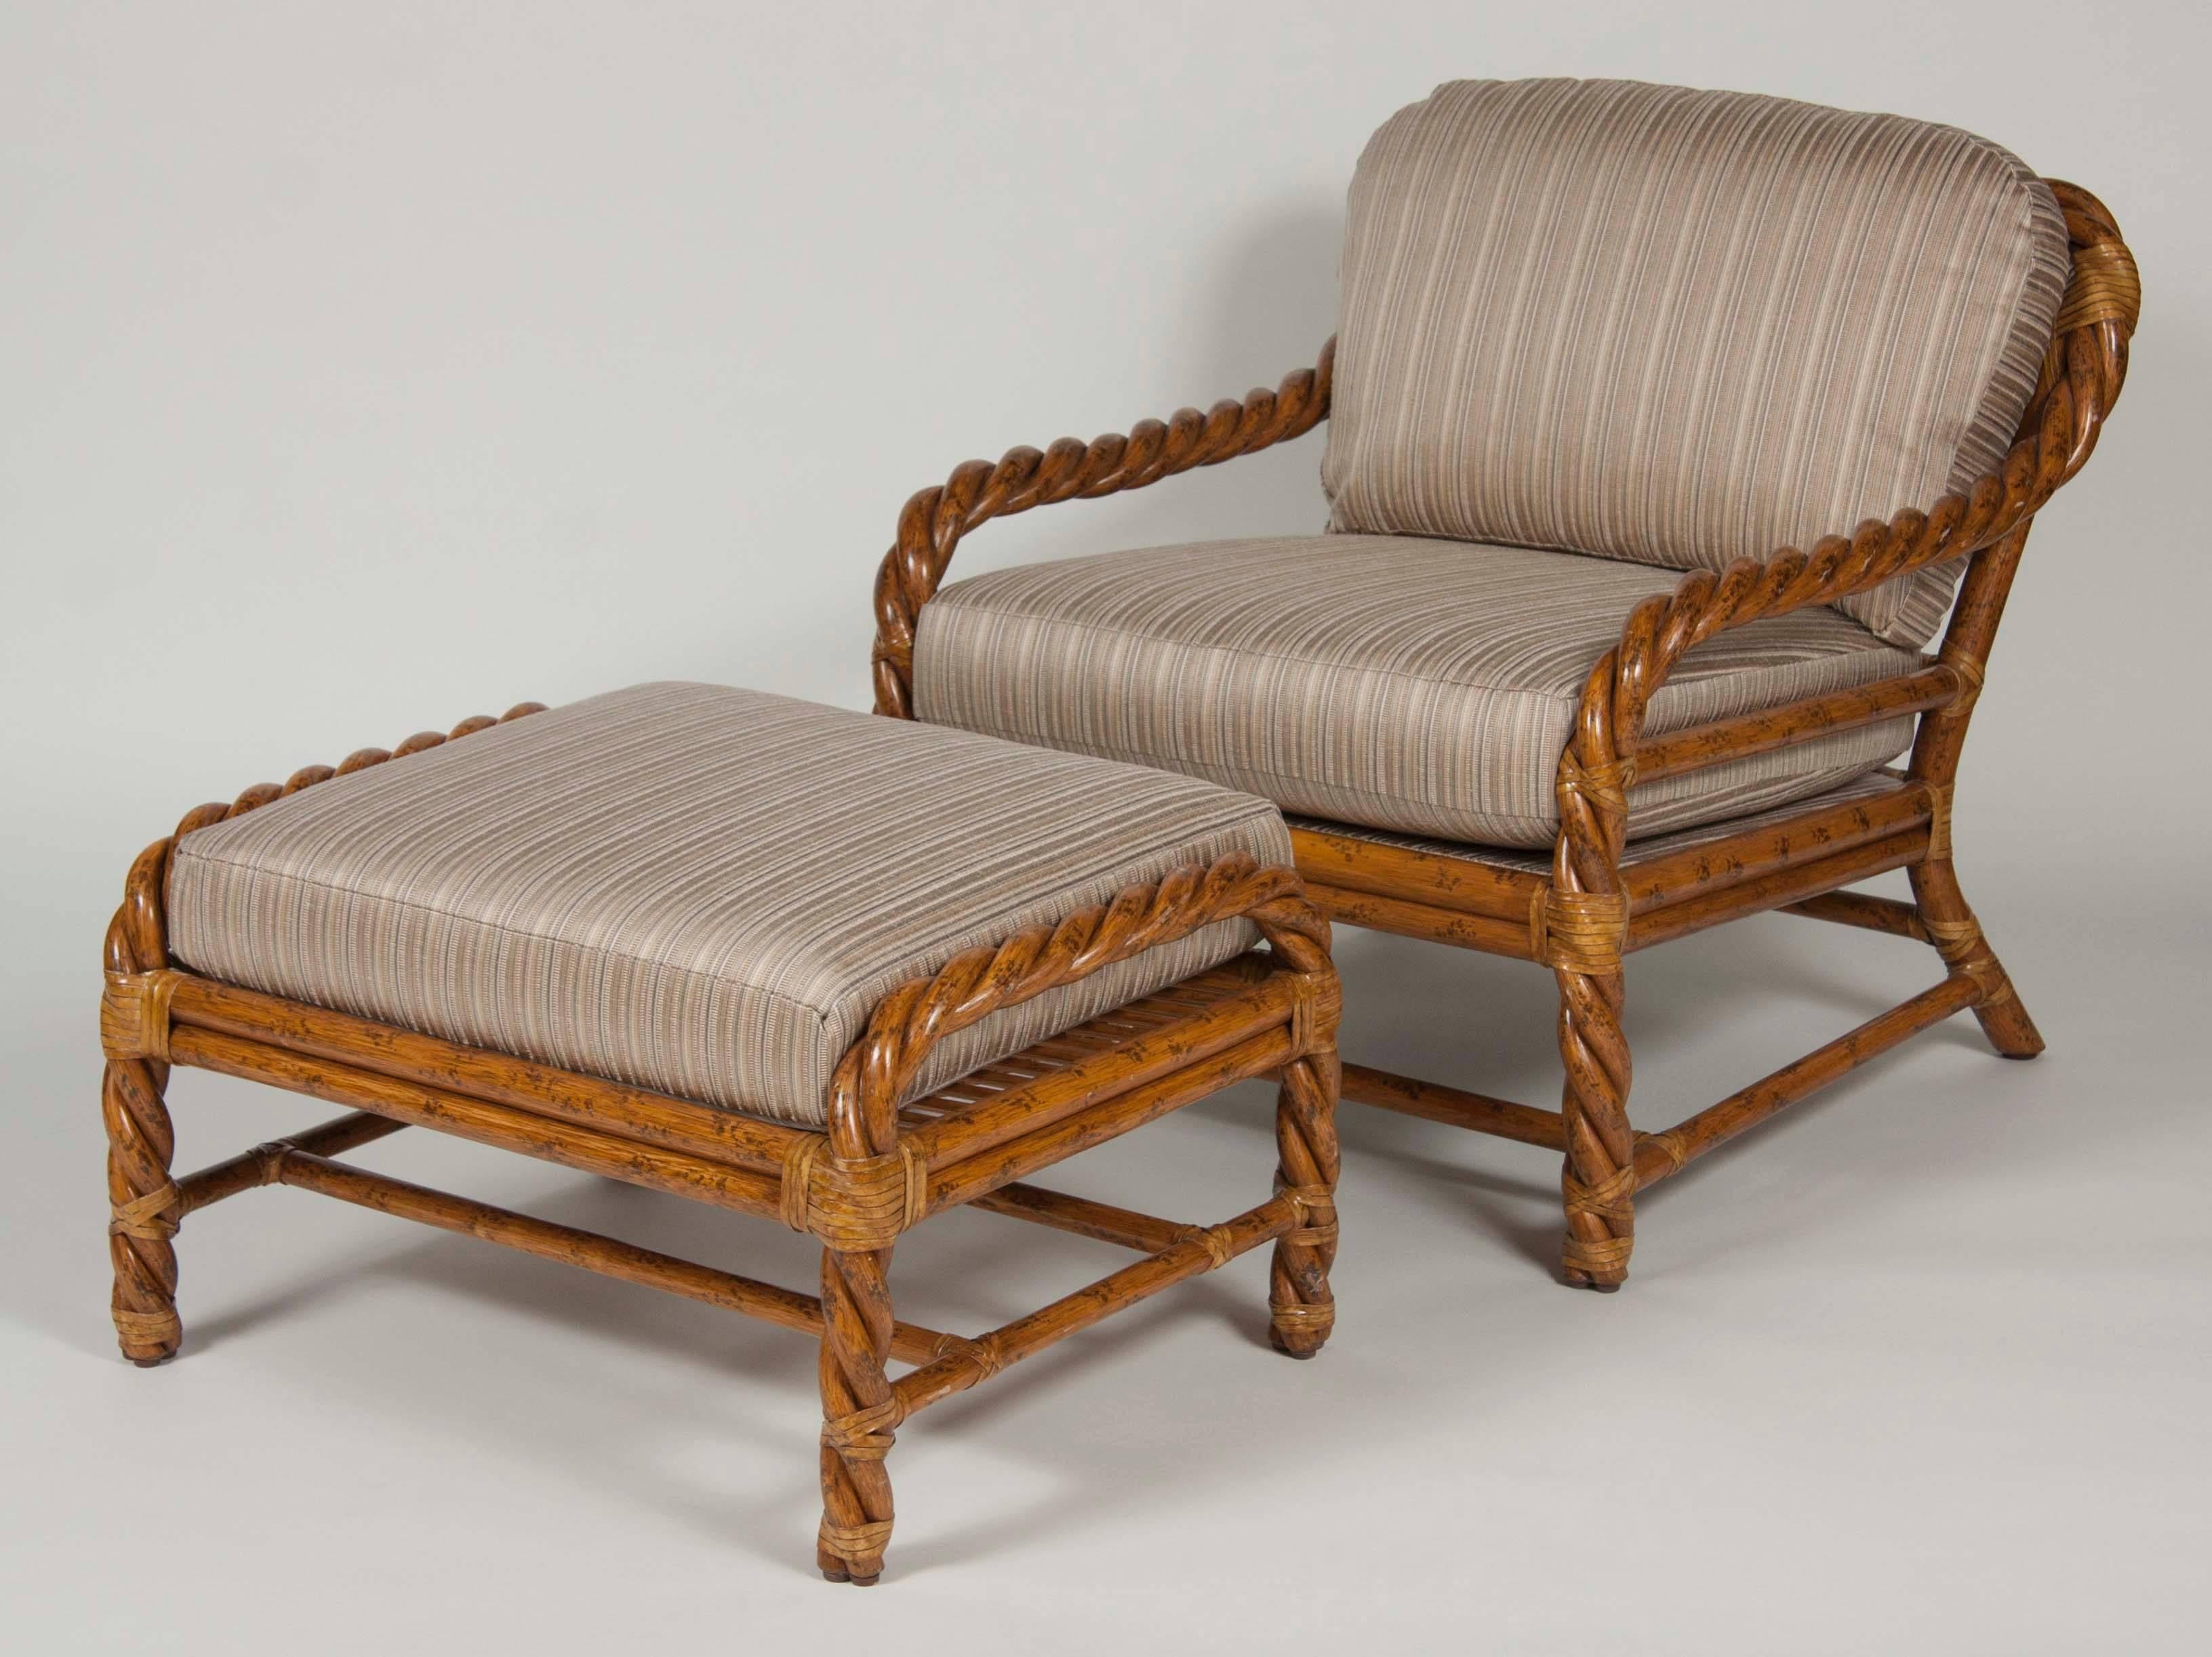 Top of the line pair of Mid-Century Modern rattan club chairs and ottoman by McGuire of twisted rattan and rawhide. Both club chairs and ottoman have been reupholstered.
Striking Mid-Century Modern intertwined bent rattan / cane and rawhide joint